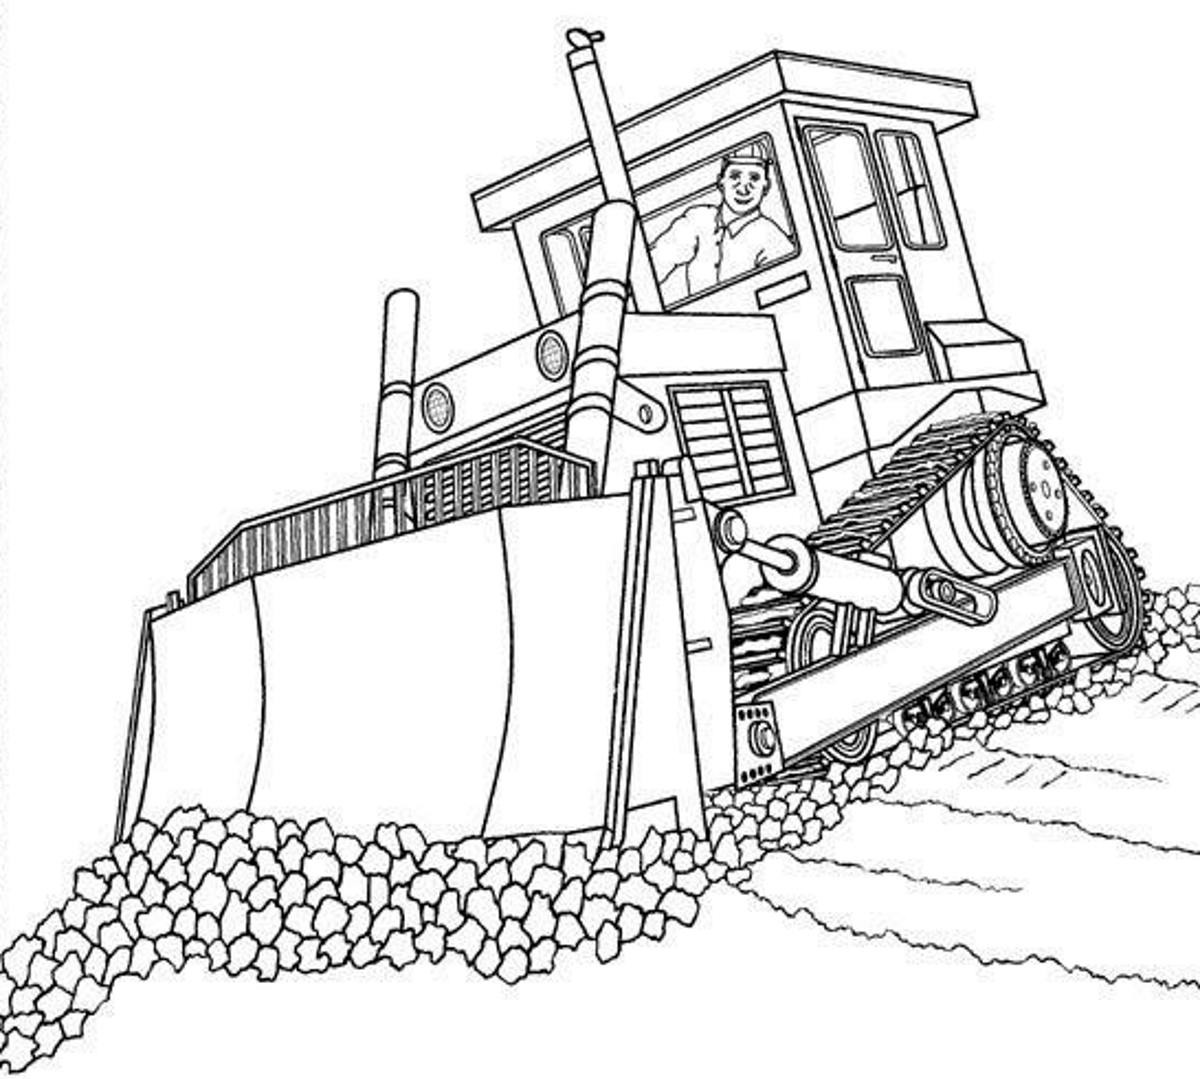  Bulldozer  coloring  pages  to download and print  for free